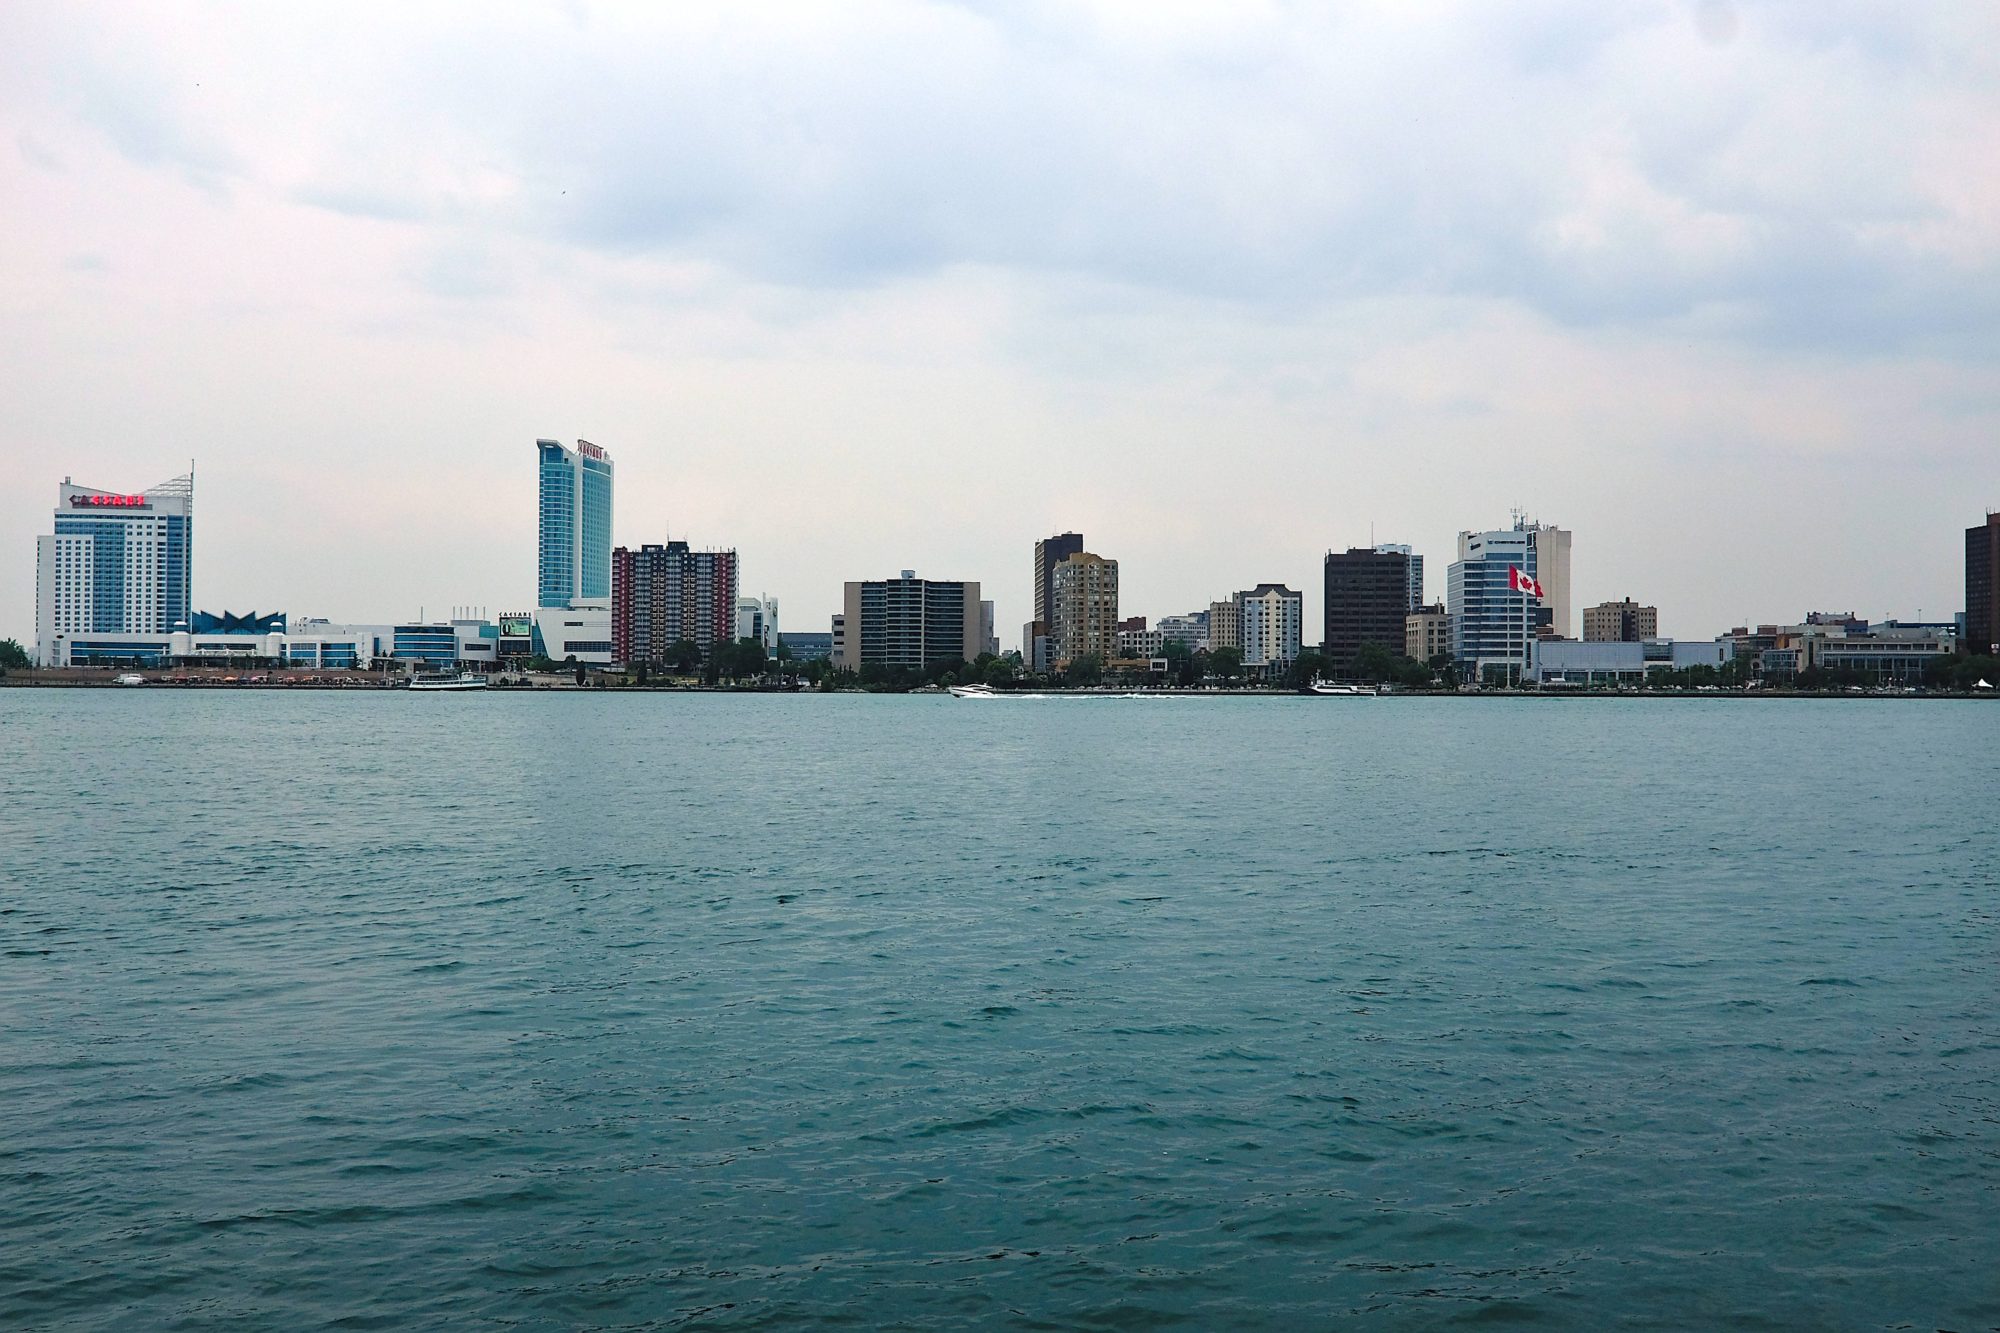 Windsor is seen across the river from Detroit